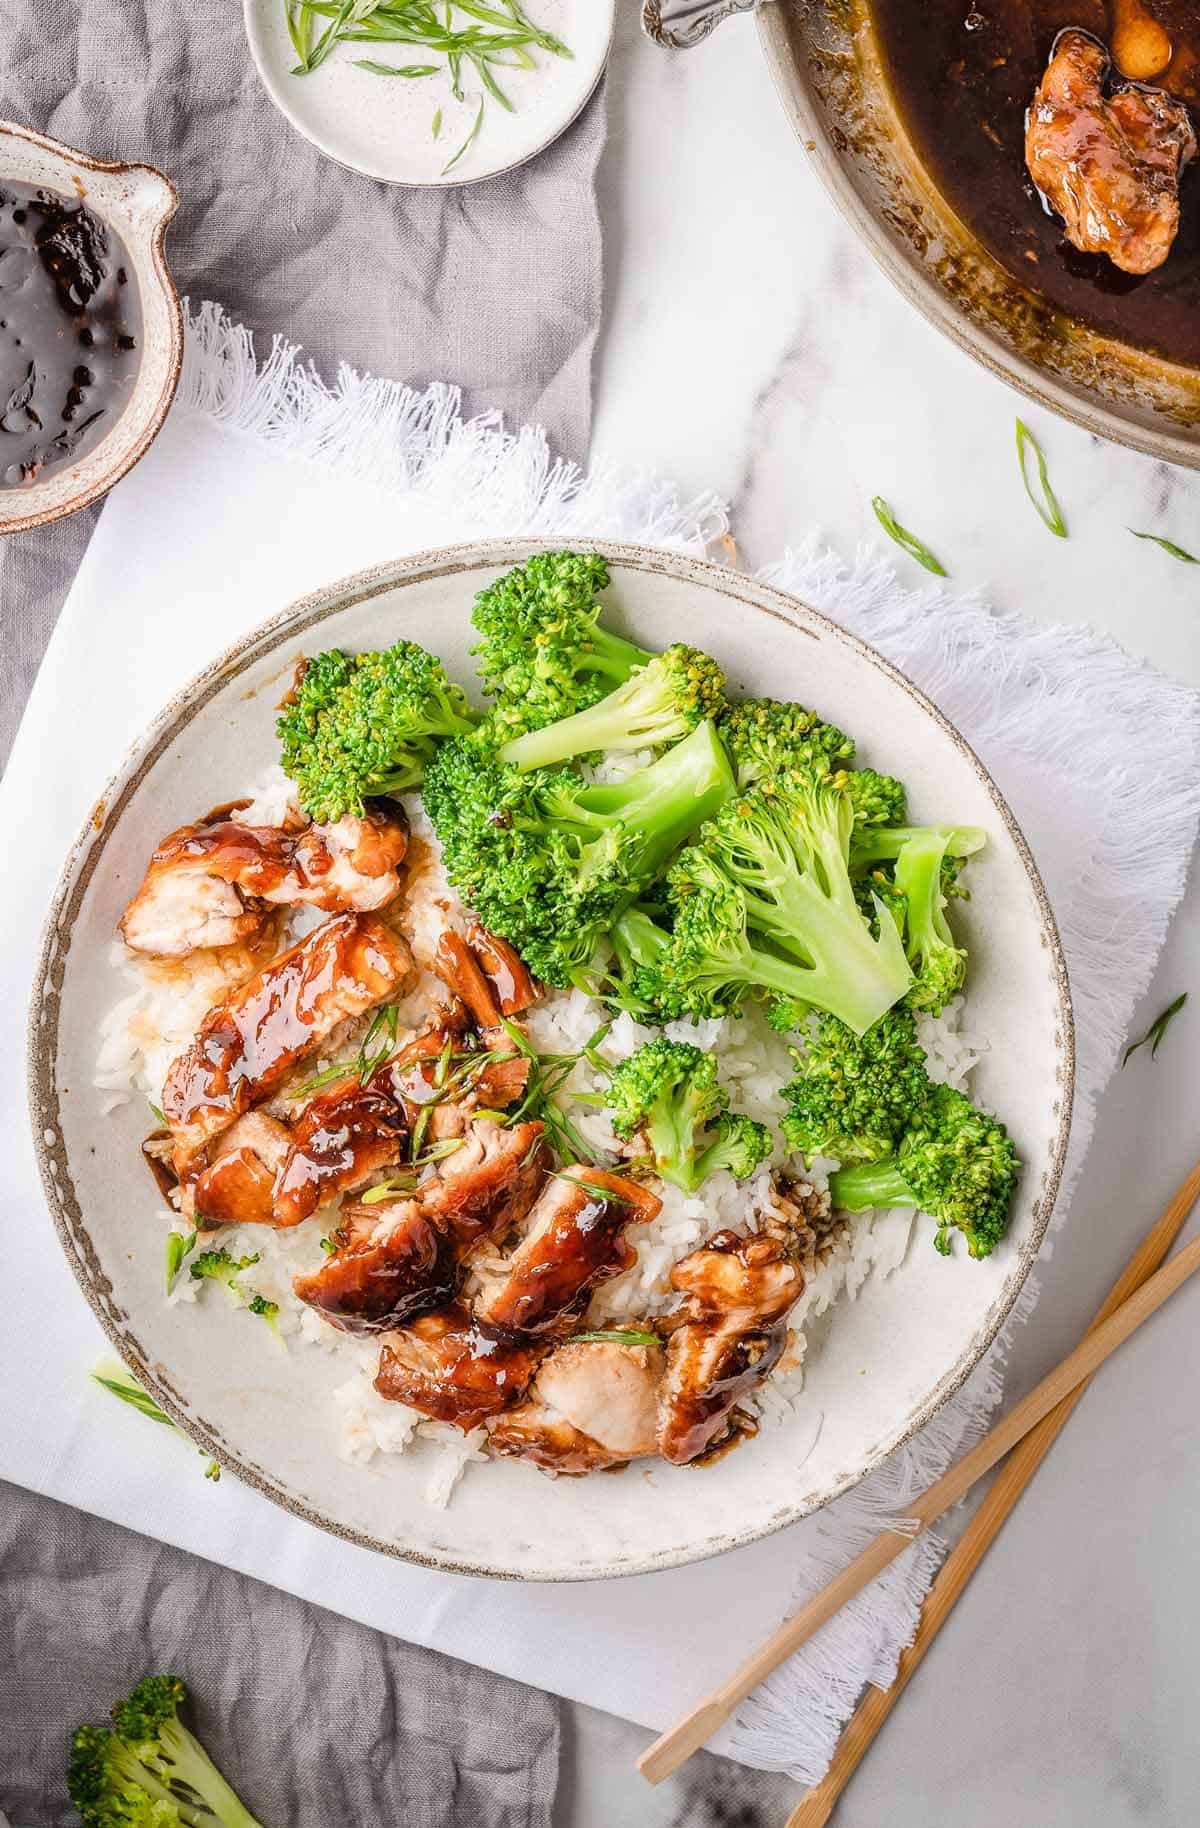 Panda Express Teriyaki Chicken is served with steamed broccoli and rice.